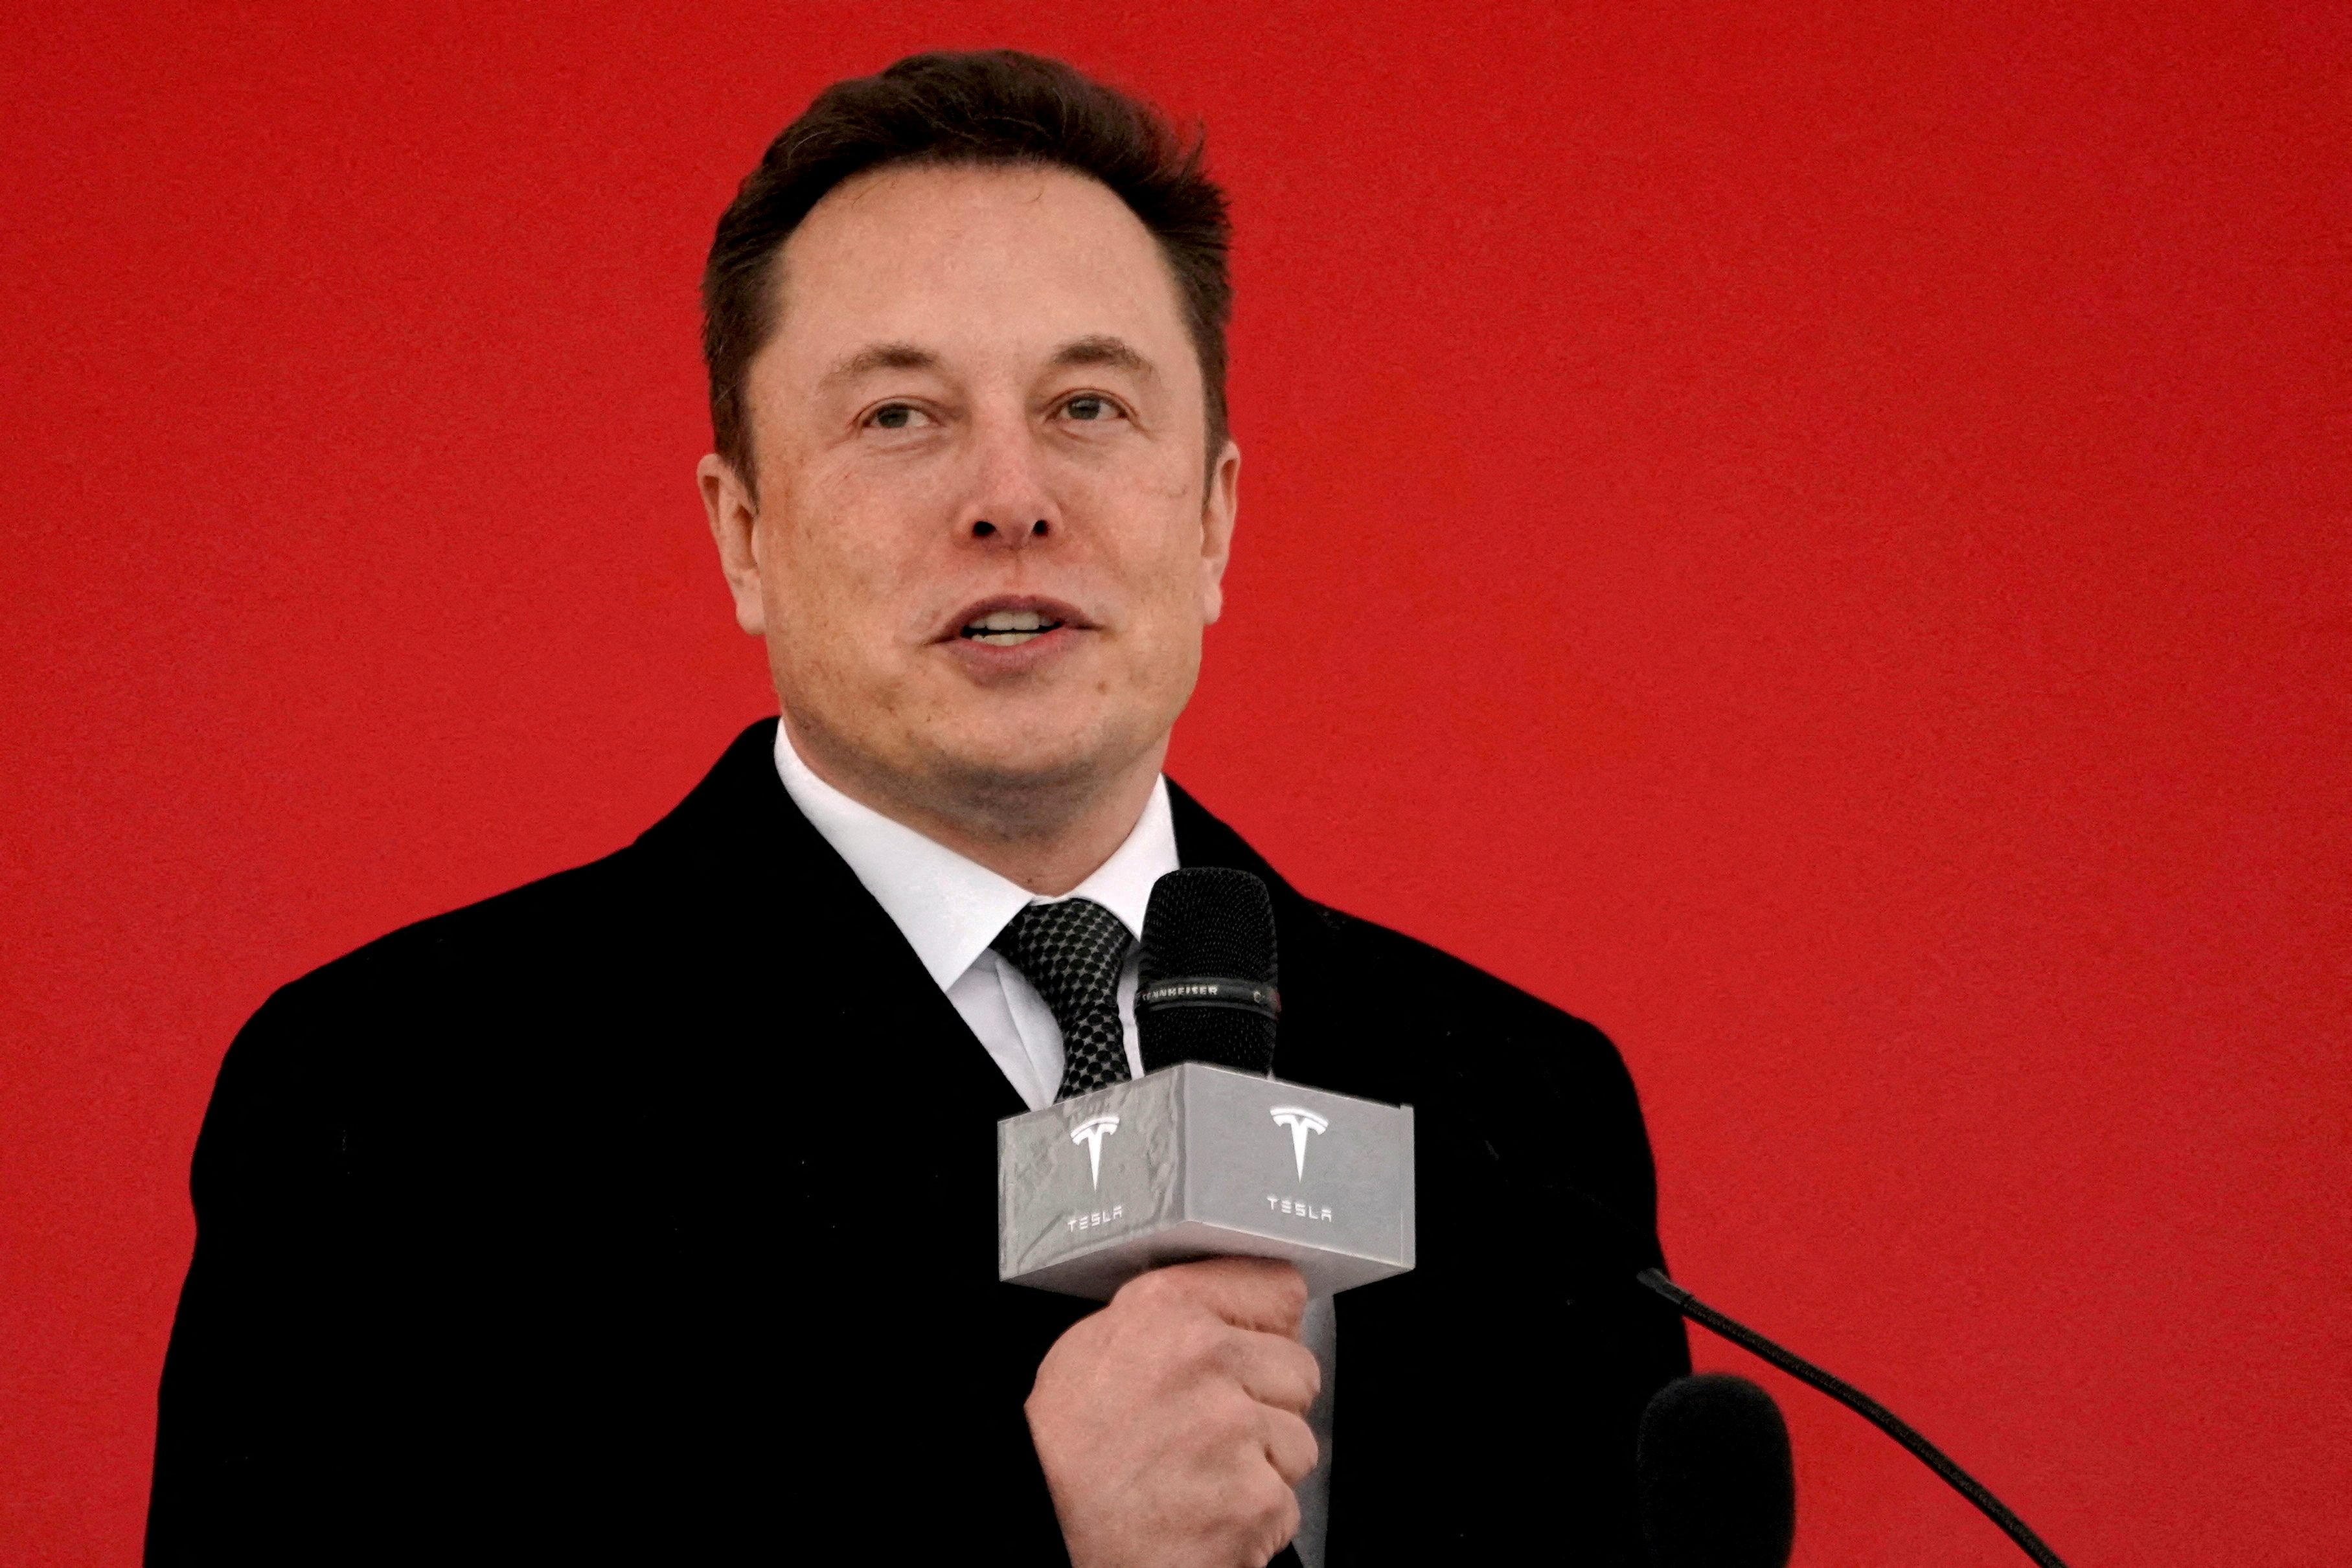 Elon Musk's net worth is over $200,000 million (REUTERS / Aly Song)